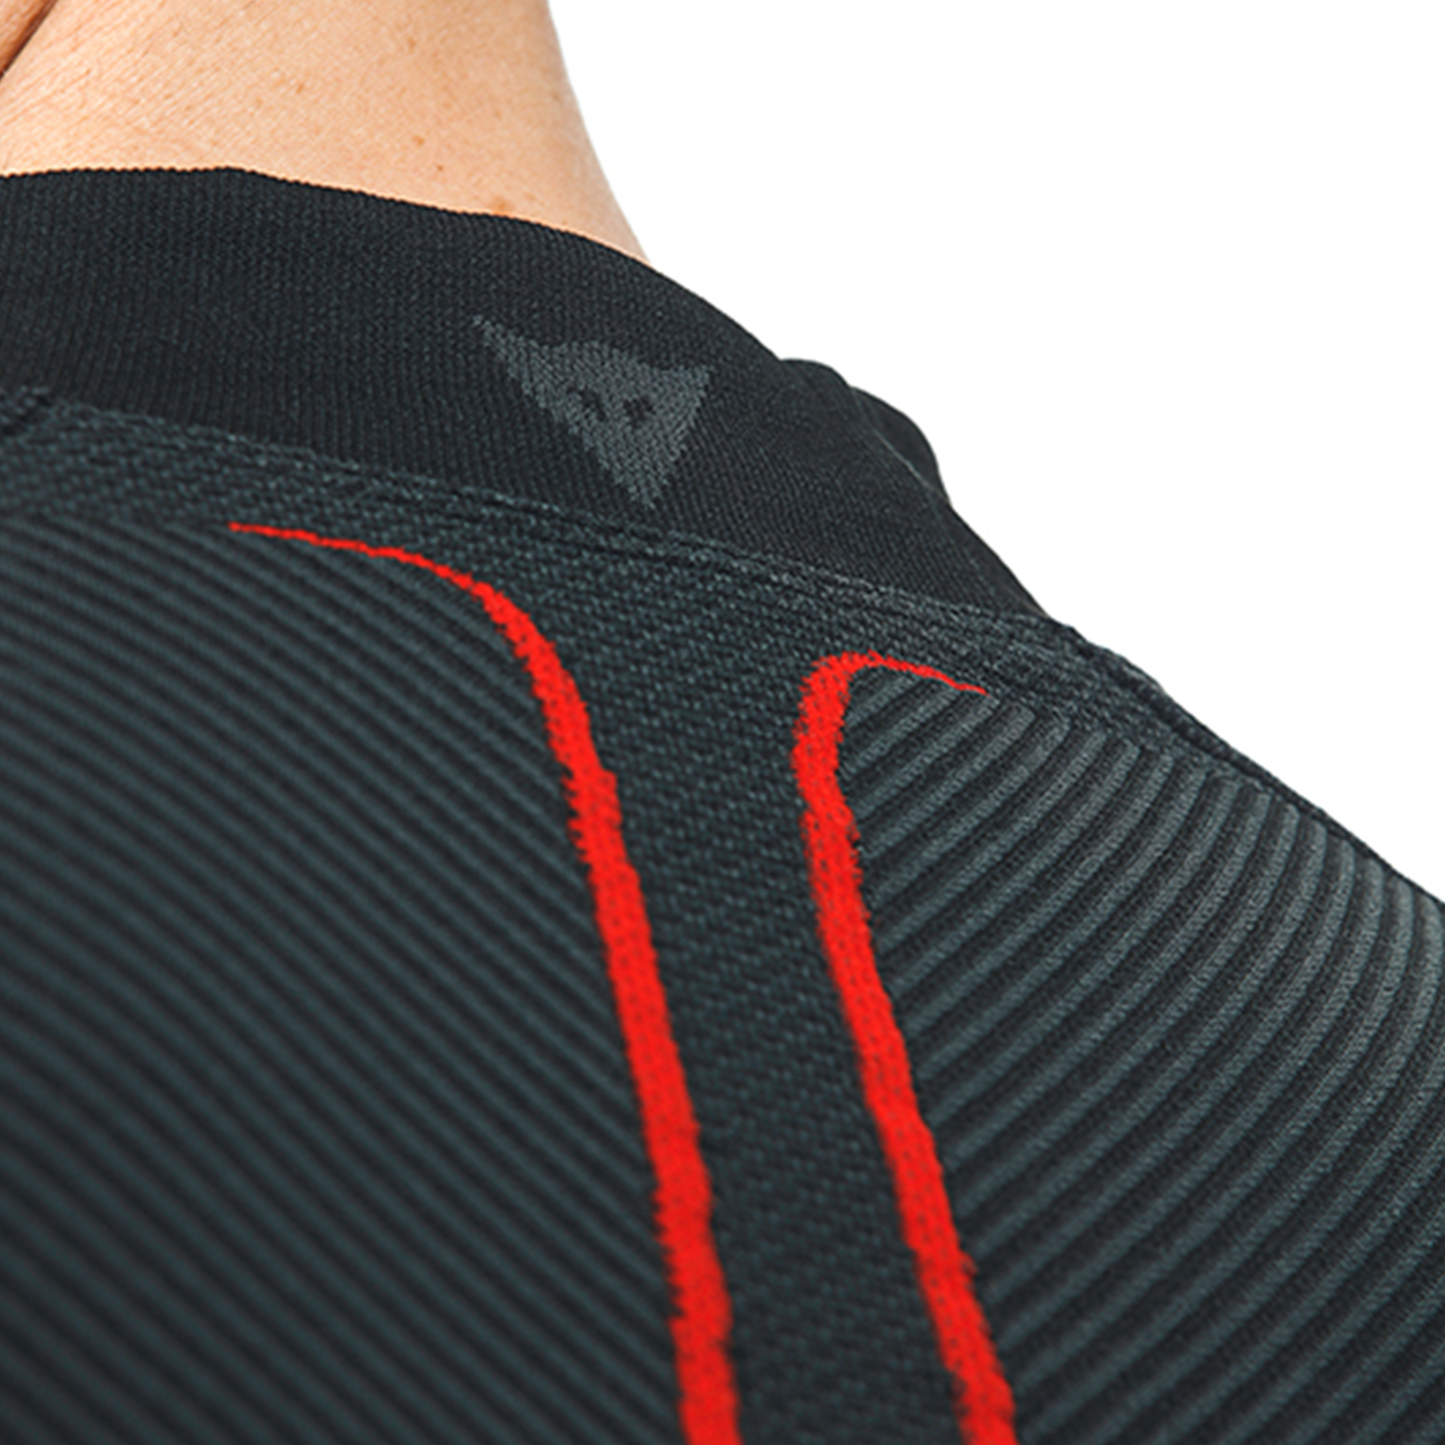 Dainese Thermo Long Sleeve - Black/Red (606)